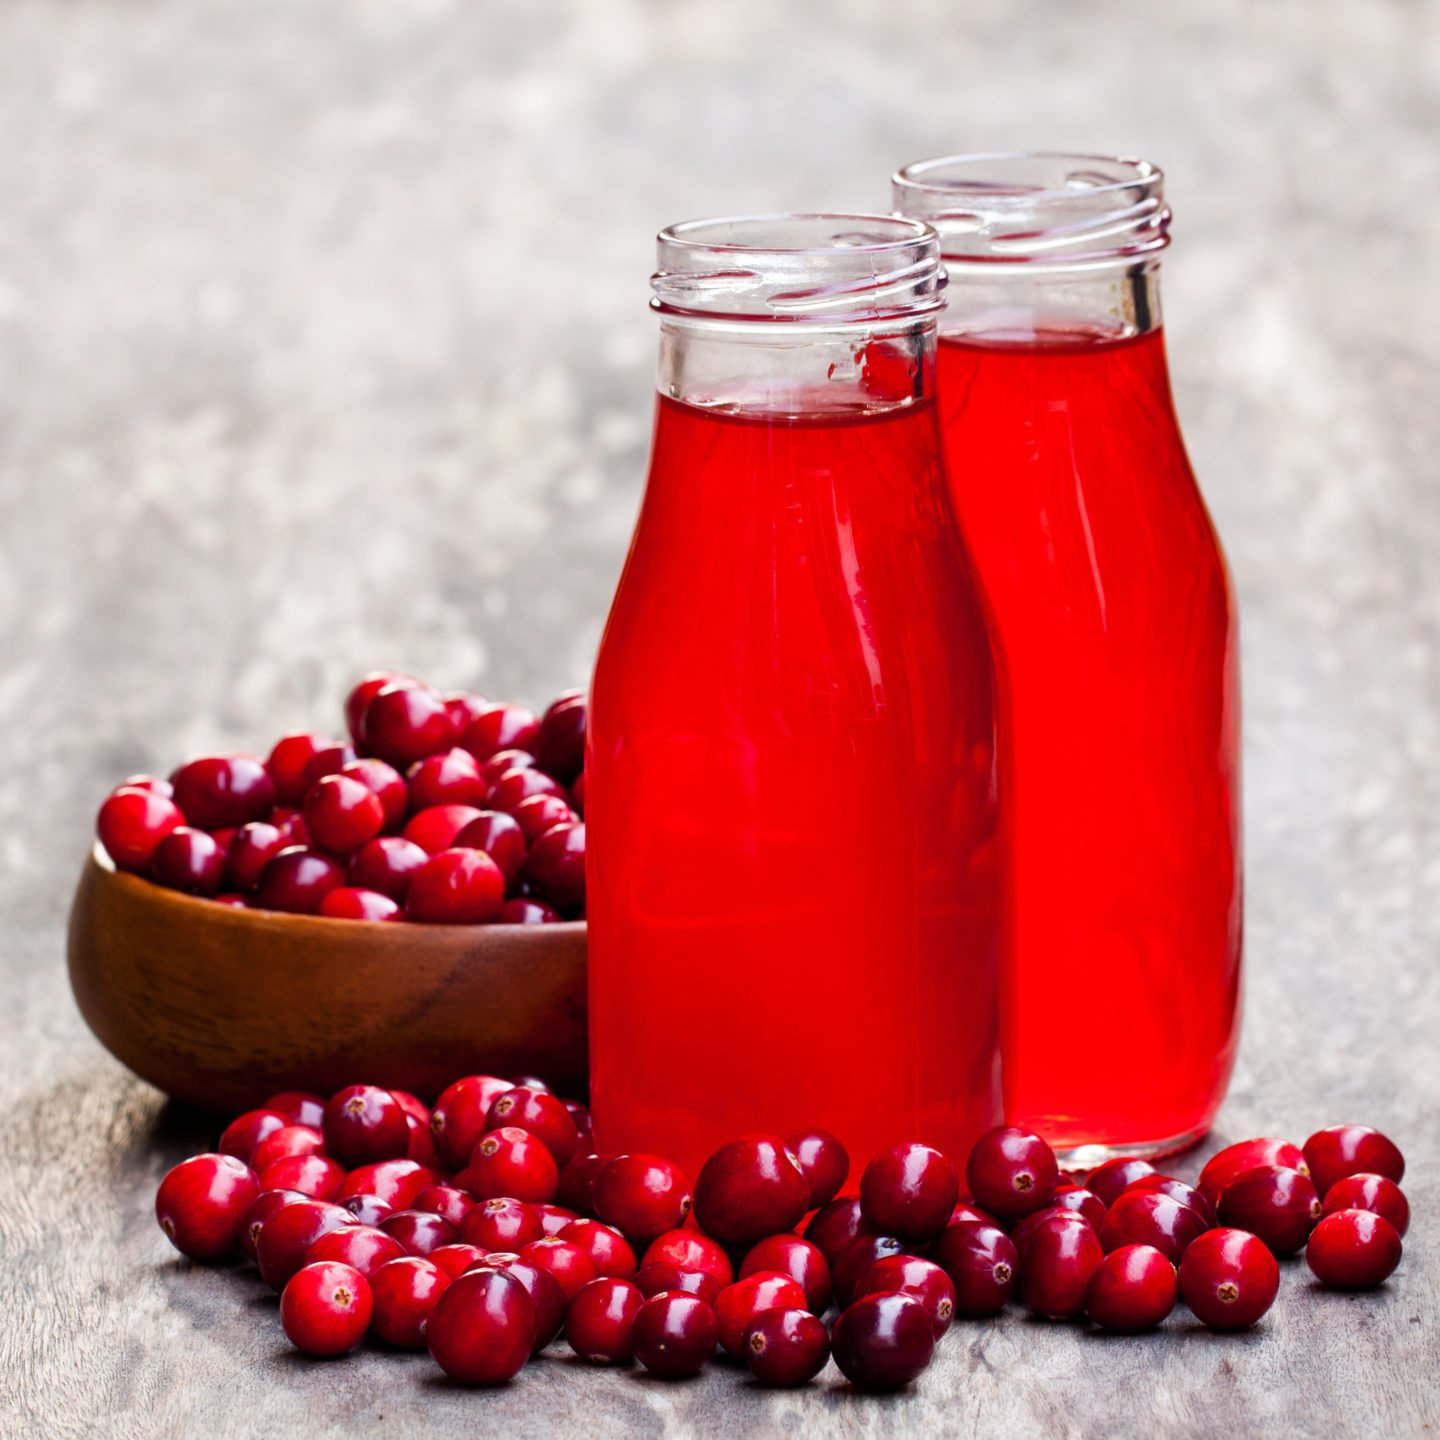 Does Cranberry Juice Help With Periods? 